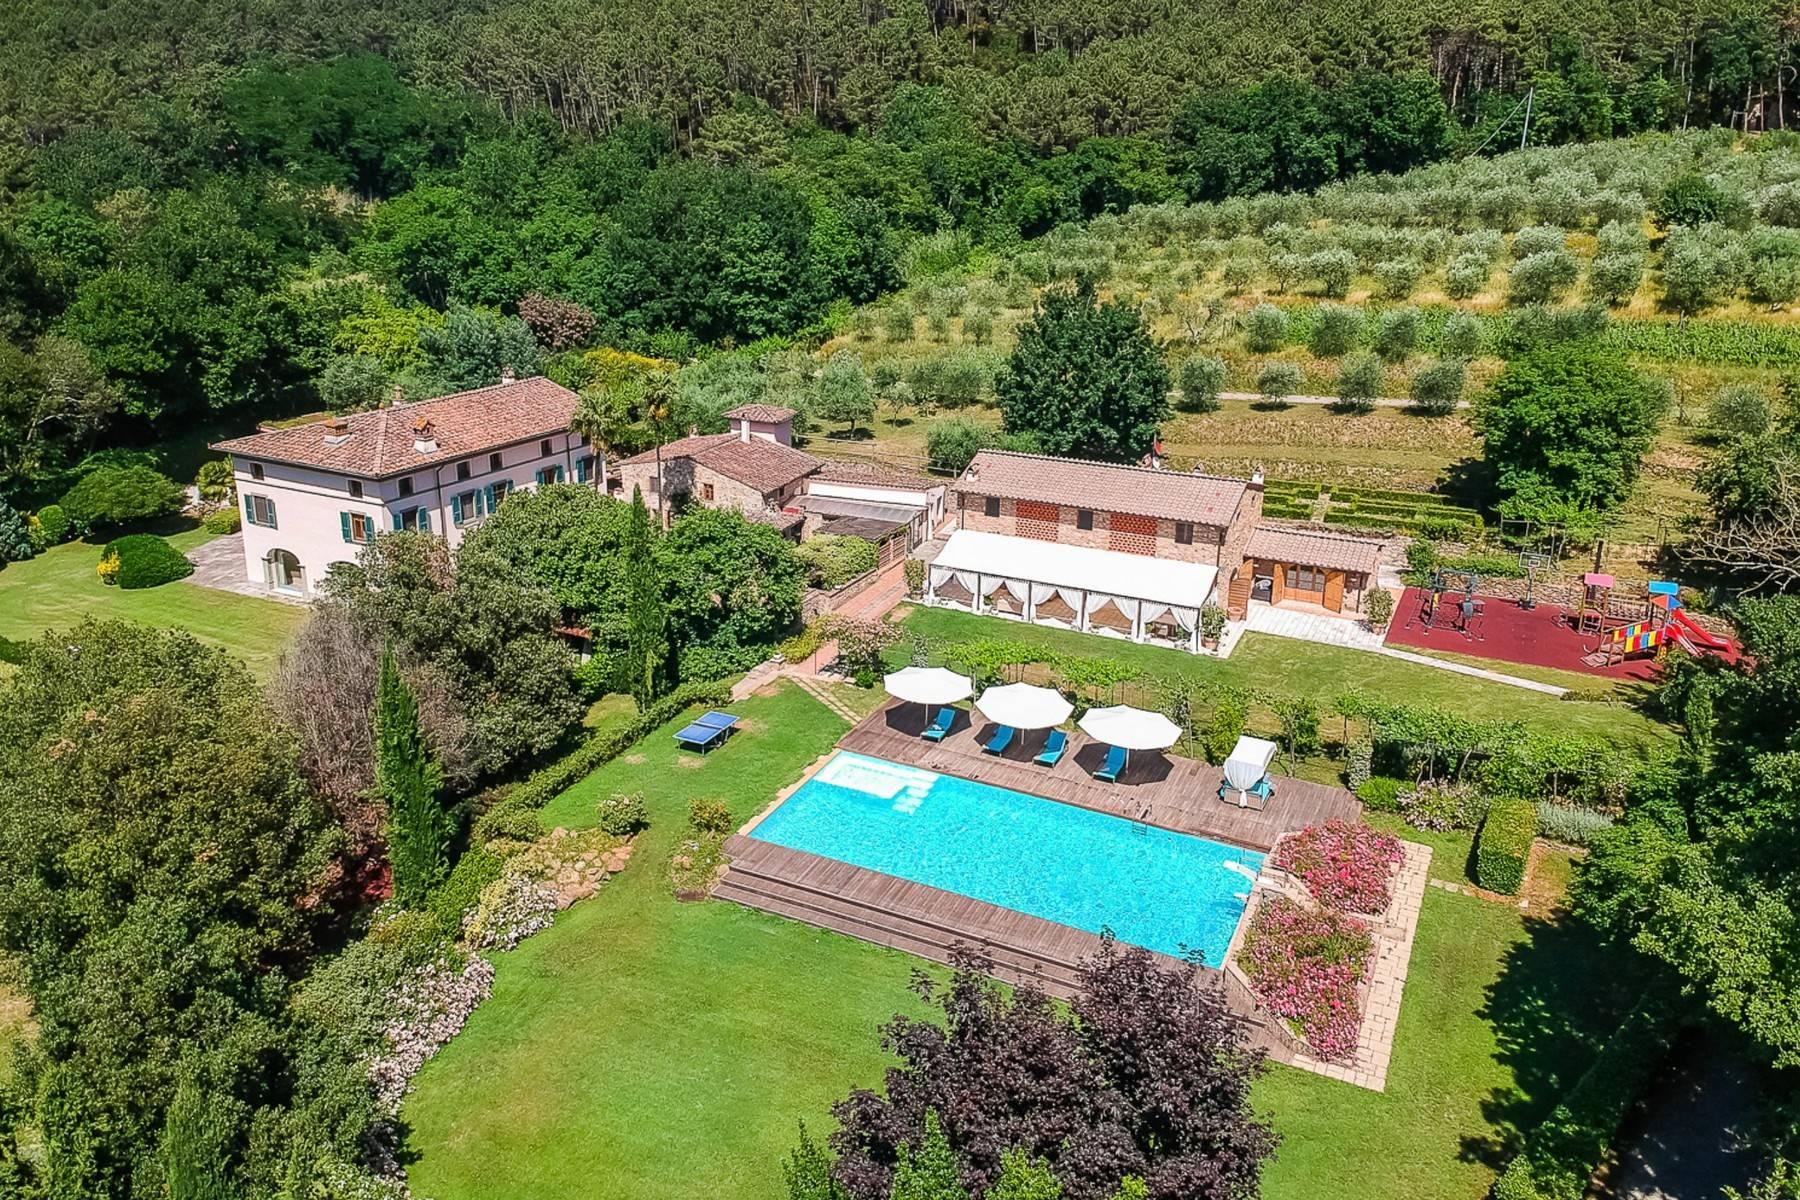 Majestic Luxury Villa with outbuildings on the hills south of Lucca - 2